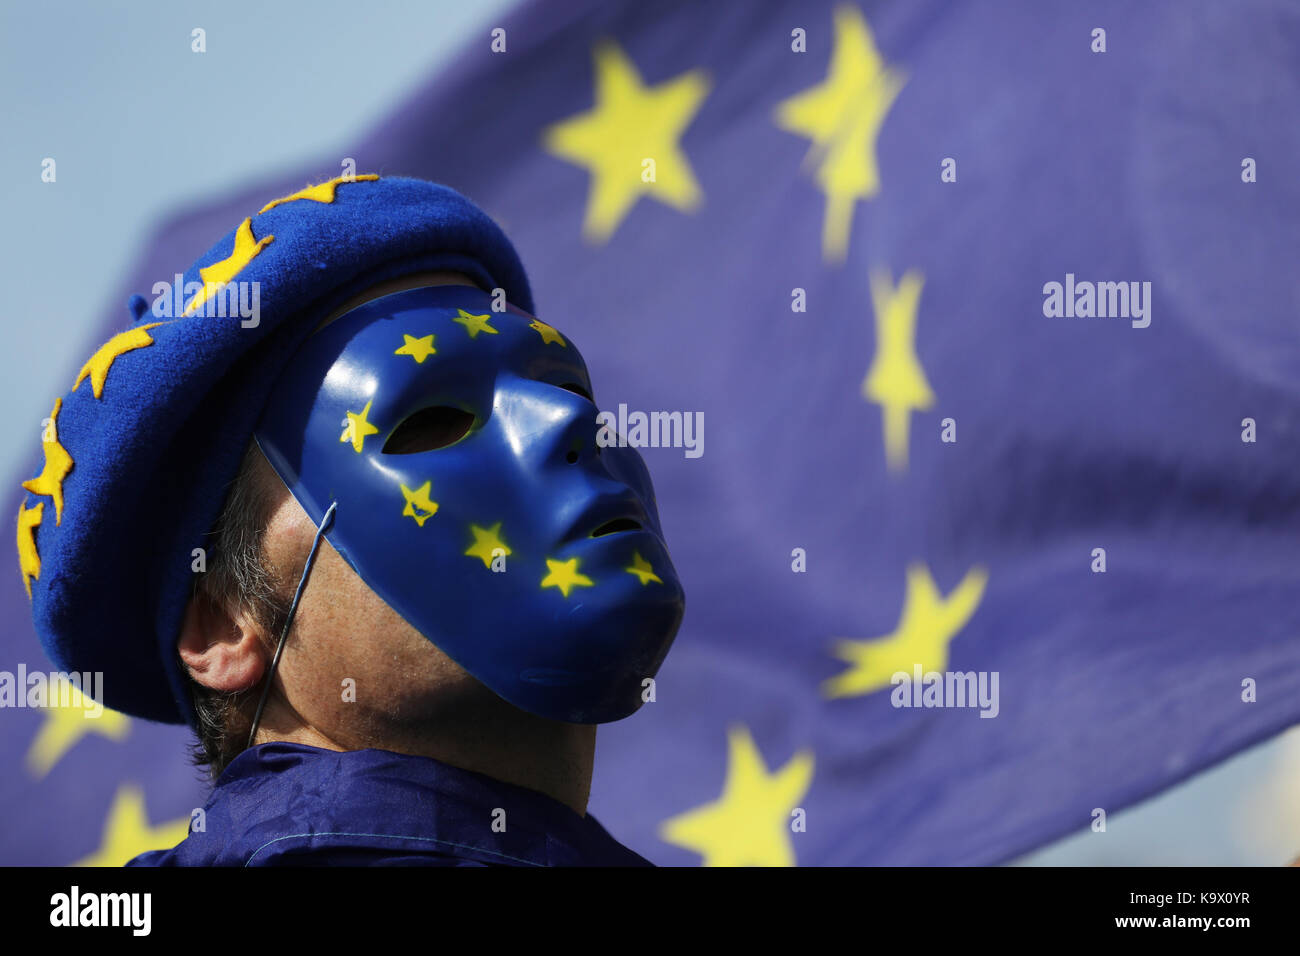 Brighton, UK. 24th September, 2017. A pro European Union supporter demonstrates during a protest against Brexit in Brighton, UK, Sunday, September 24, 2017. Protesters rallied outside the annual Labour Party Conference being held in Brighton and attended by the opposition leader Jeremy Corbyn. Photograph : Credit: Luke MacGregor/Alamy Live News Stock Photo